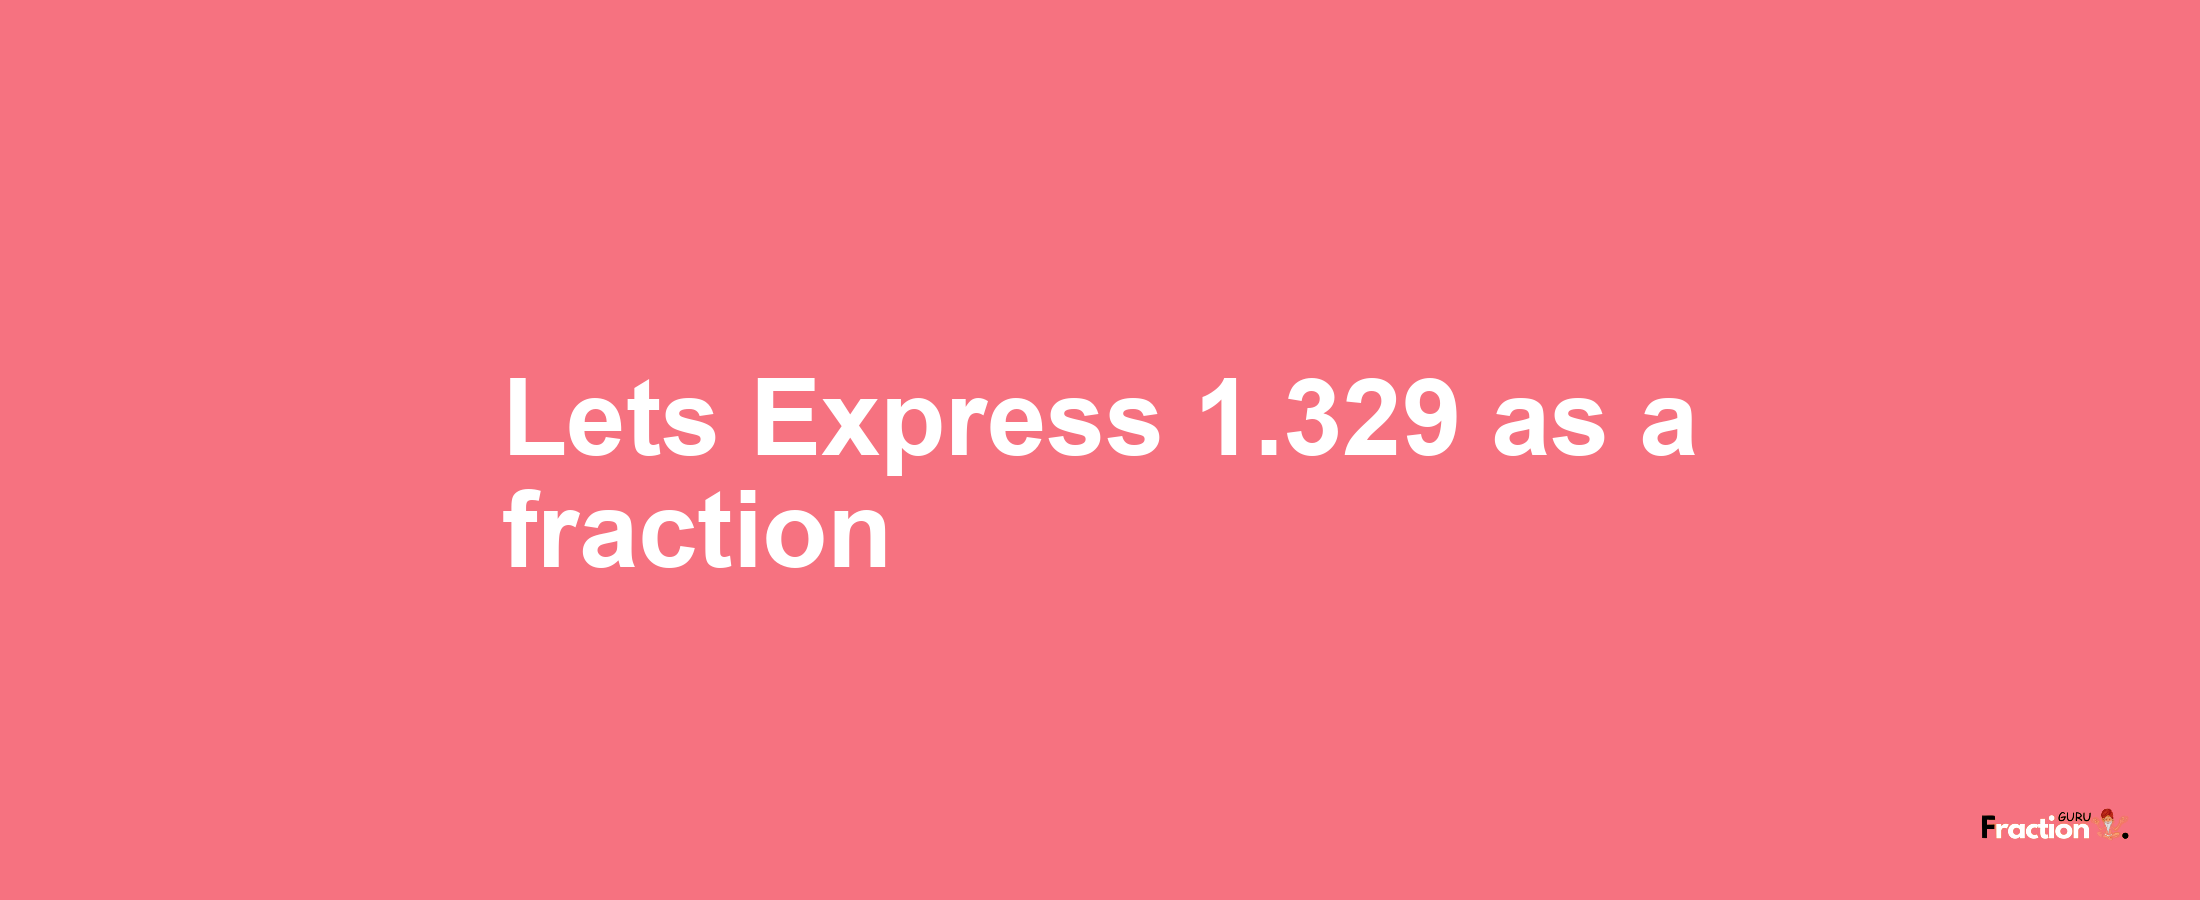 Lets Express 1.329 as afraction